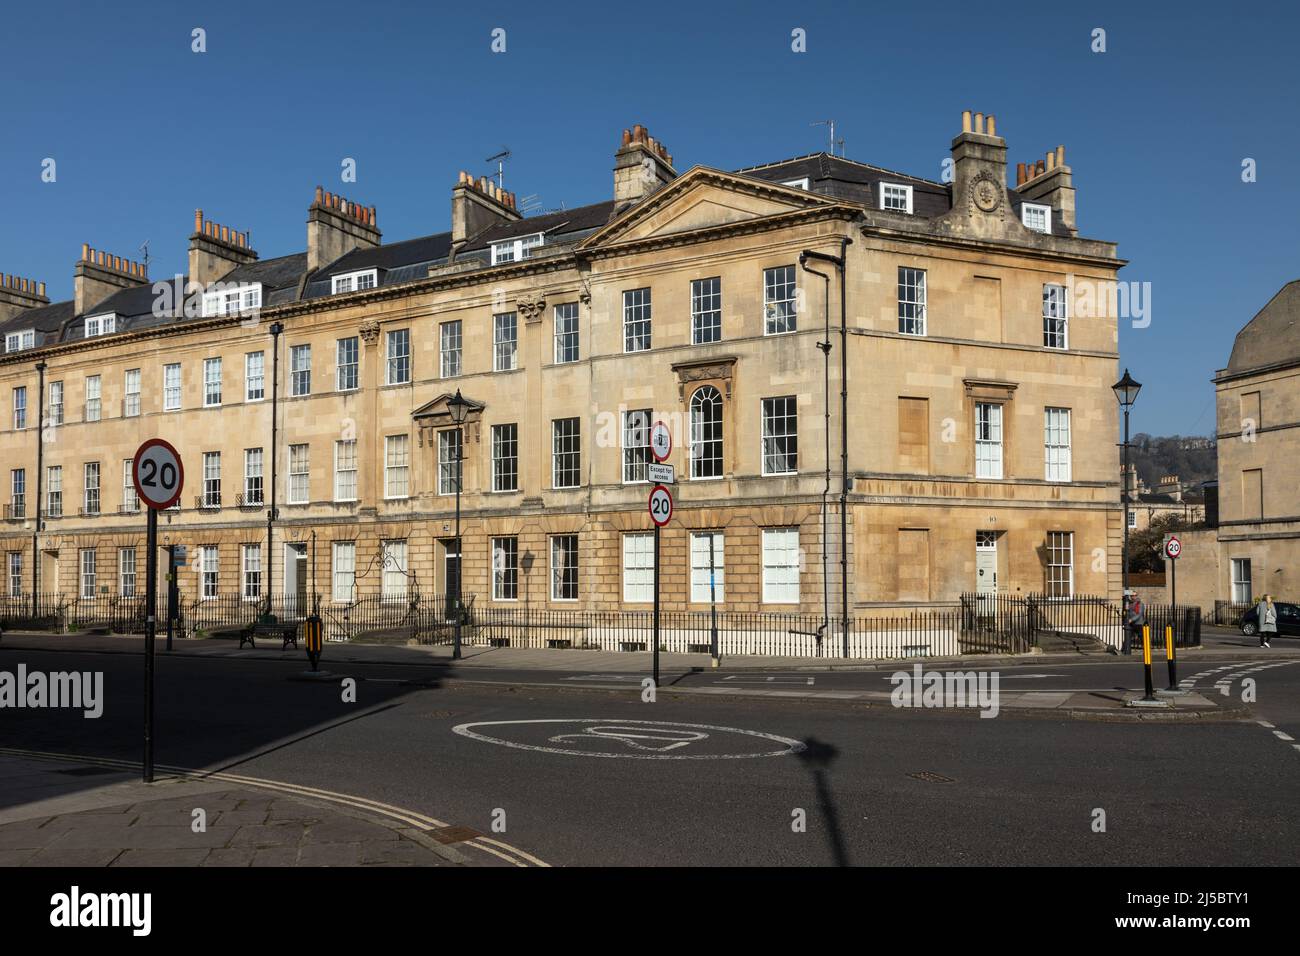 Georgian terraced houses on the corner of Great Pulteney Street and Sydney Place in the UNESCO World Heritage Site of Bath, Somerset, England, UK Stock Photo